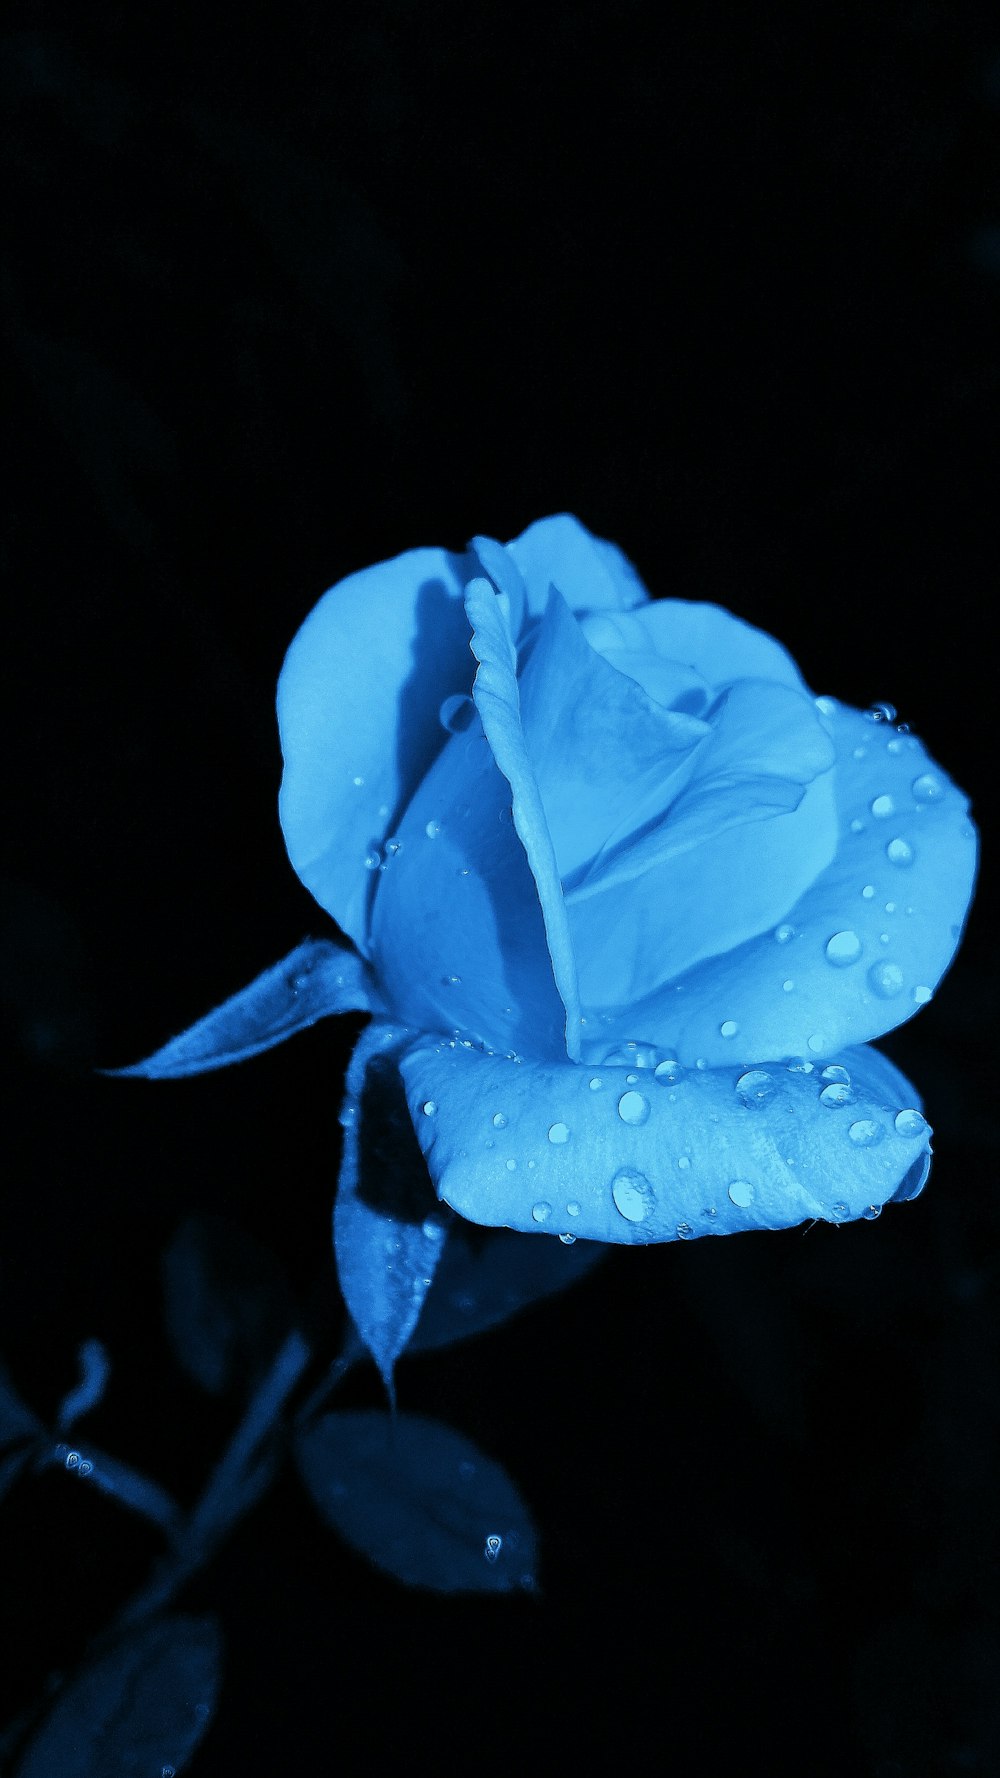 Incredible Compilation of Full 4K Blue Roses Images: Discover the Best 999+ Blue Roses Images